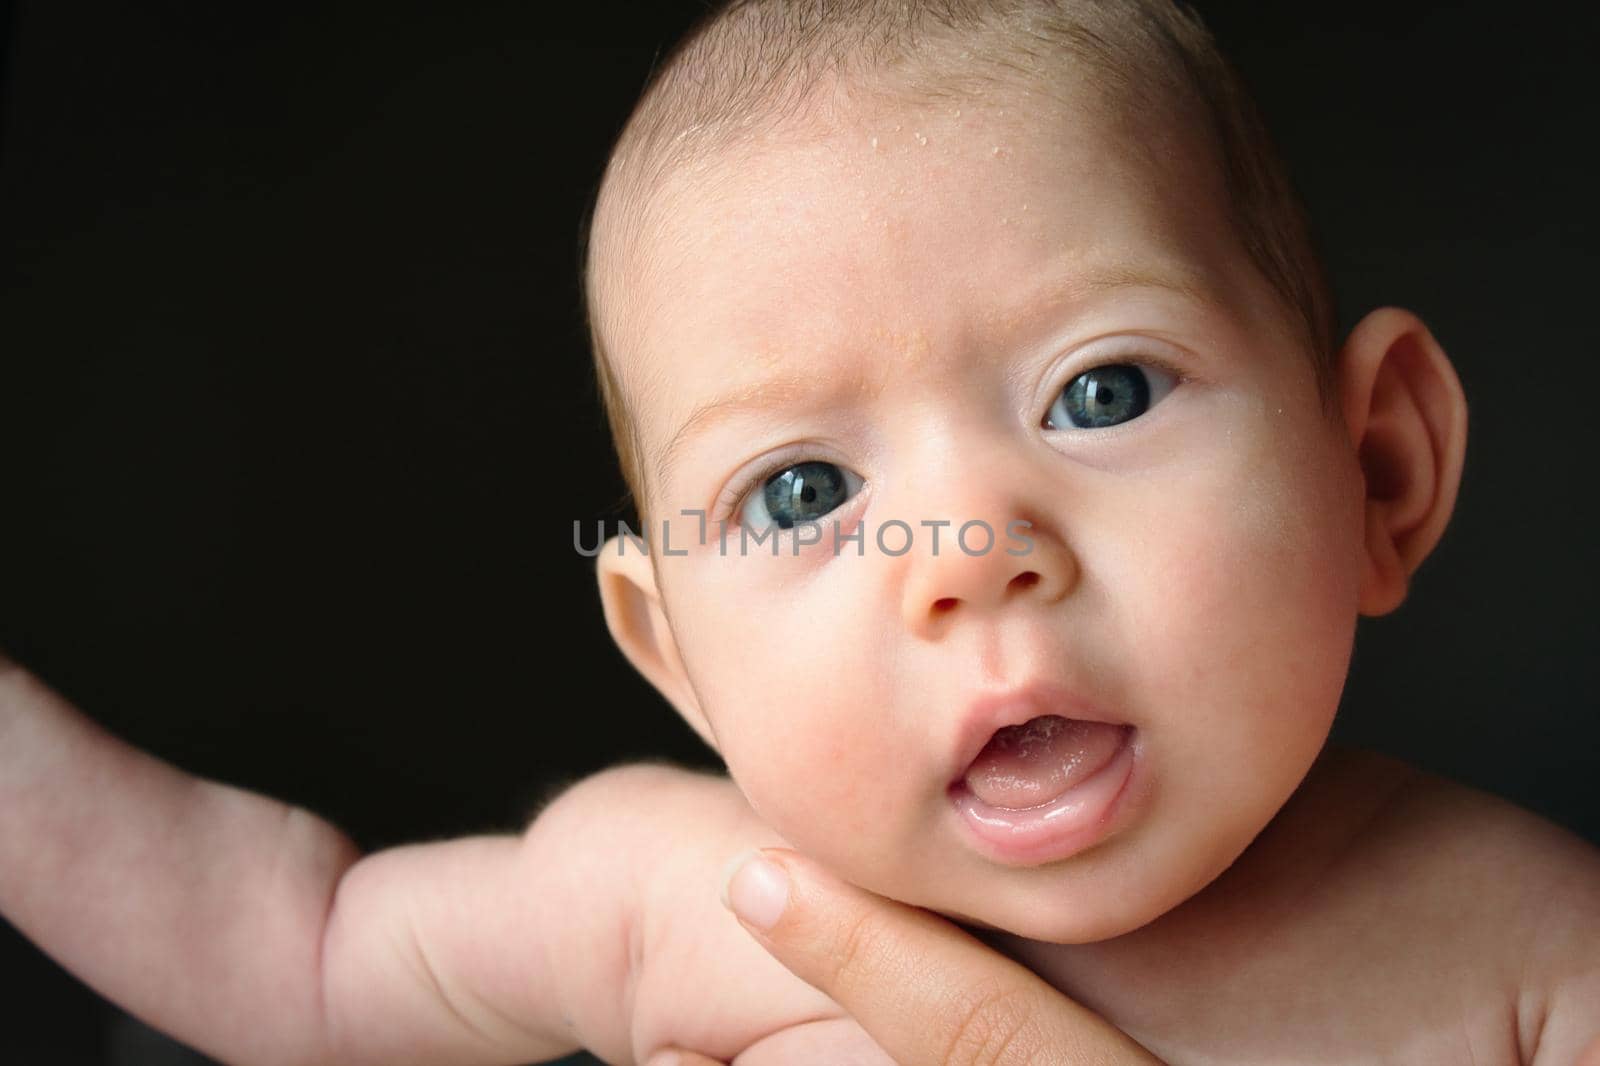 Newborn baby against black background with big eyes looking into the camera being held by her mother by tennesseewitney